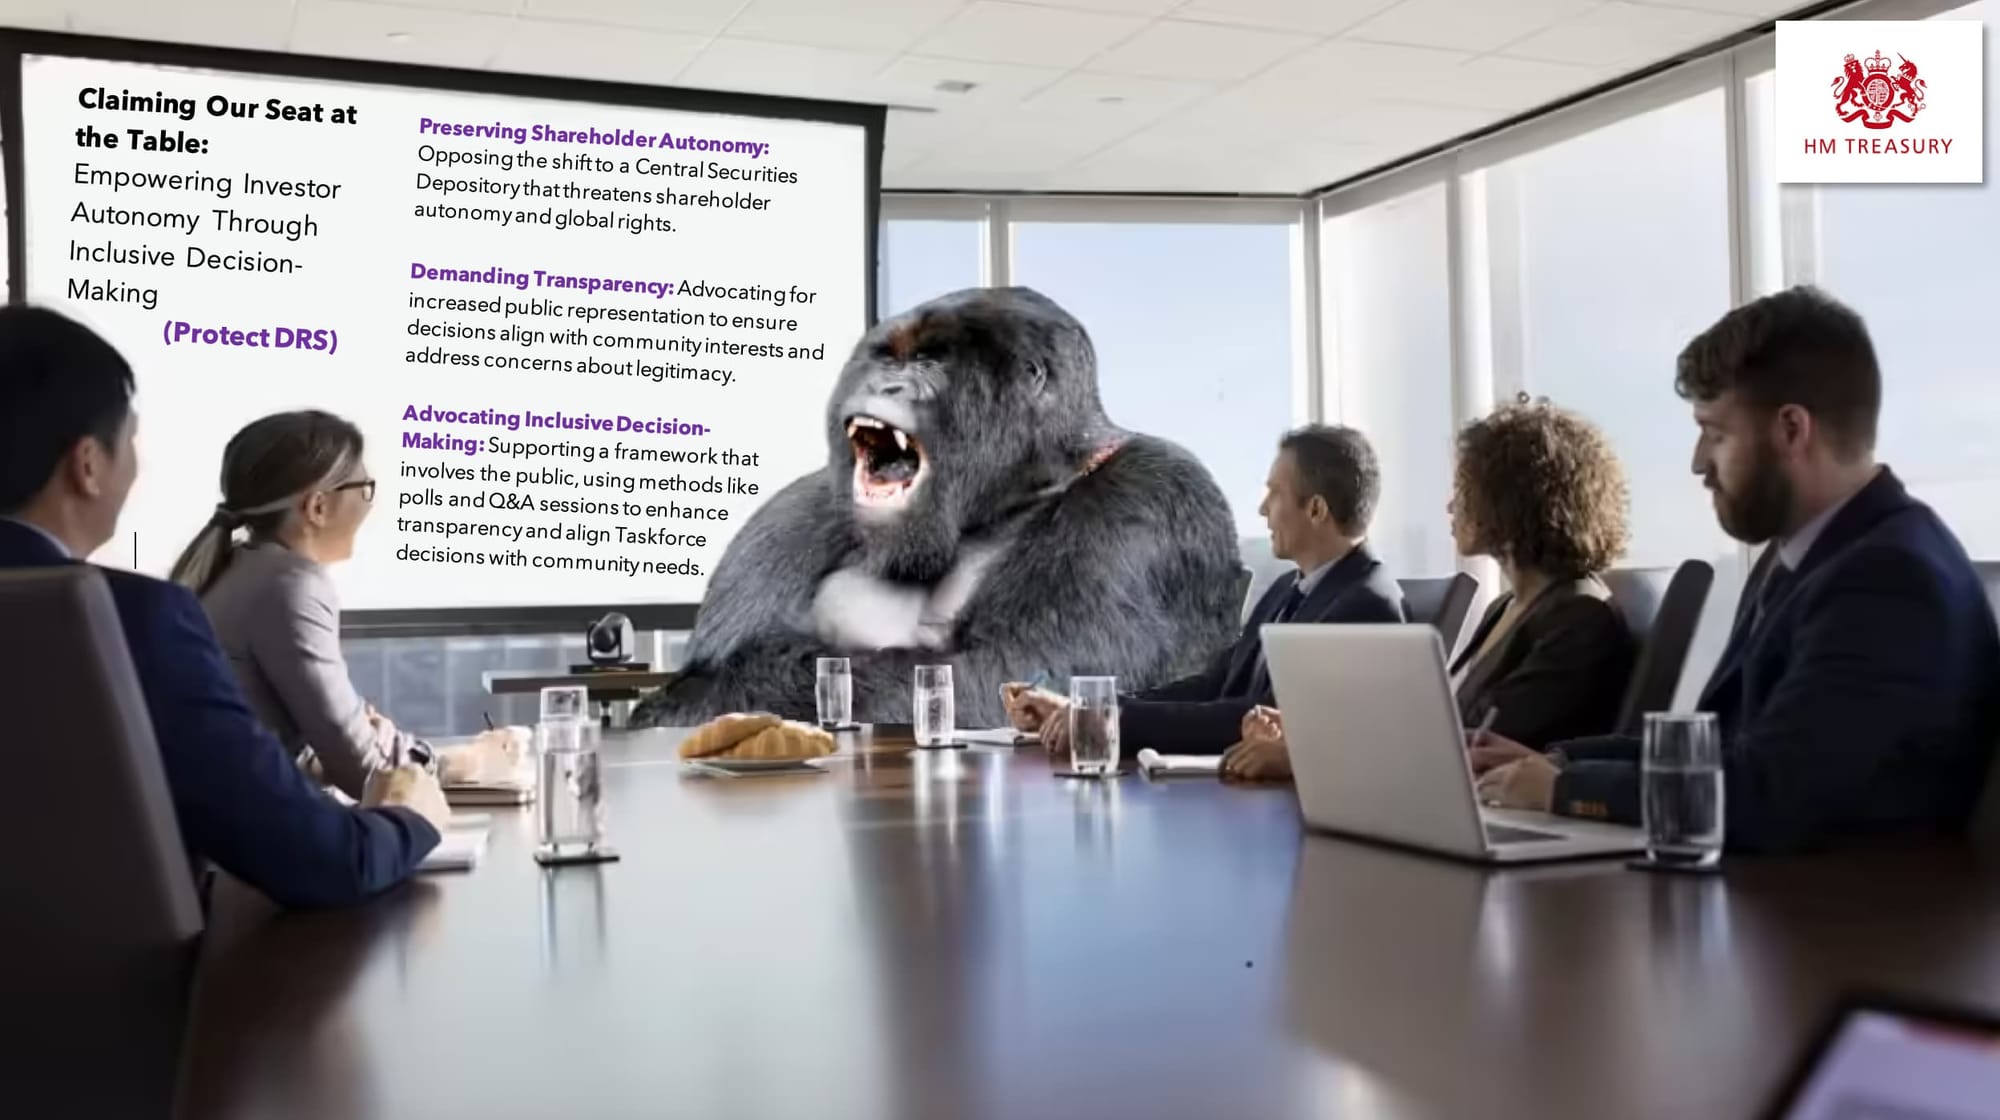 IMAGE DEPICTS APE AT TABLE DISCUSSING NEED FOR REPRESENTATION